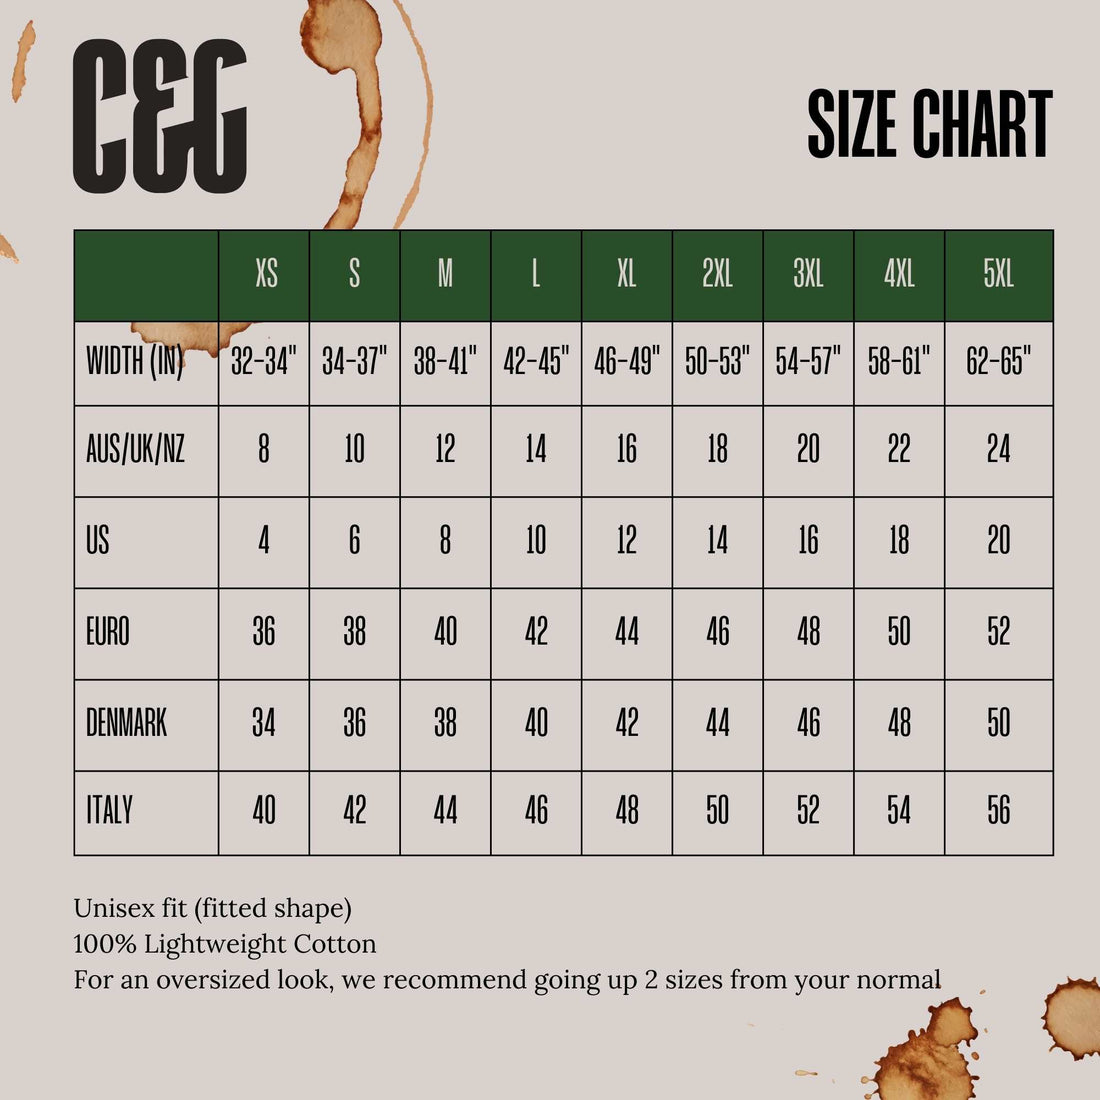 the size chart for a women&